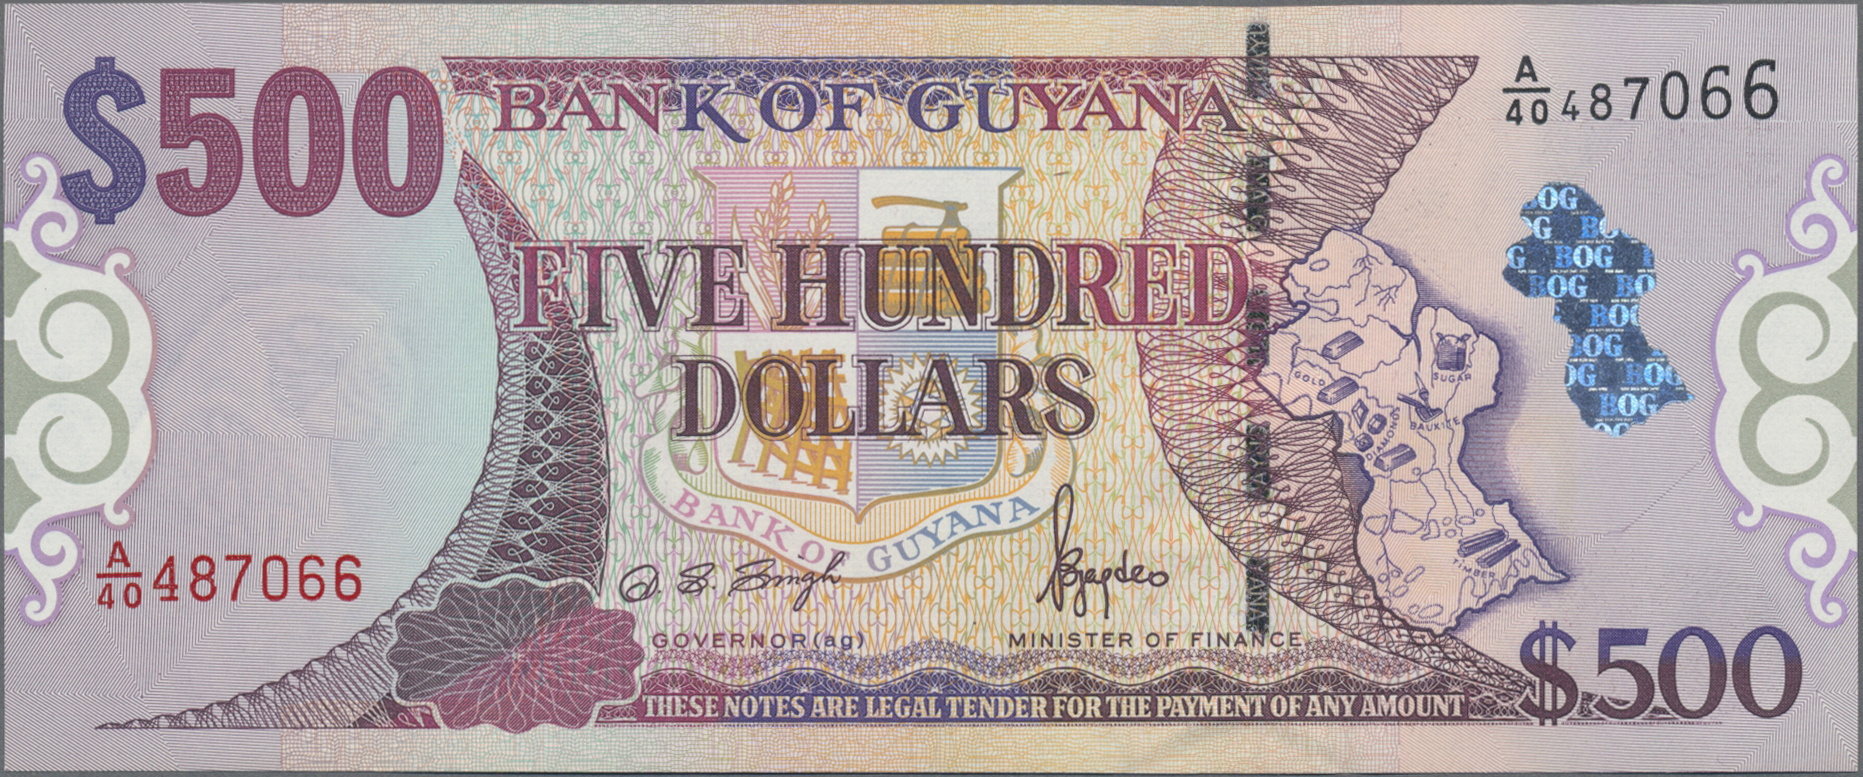 Lot 00403 - Guyana | Banknoten  -  Auktionshaus Christoph Gärtner GmbH & Co. KG 54th AUCTION - Day 1 Coins & Banknotes